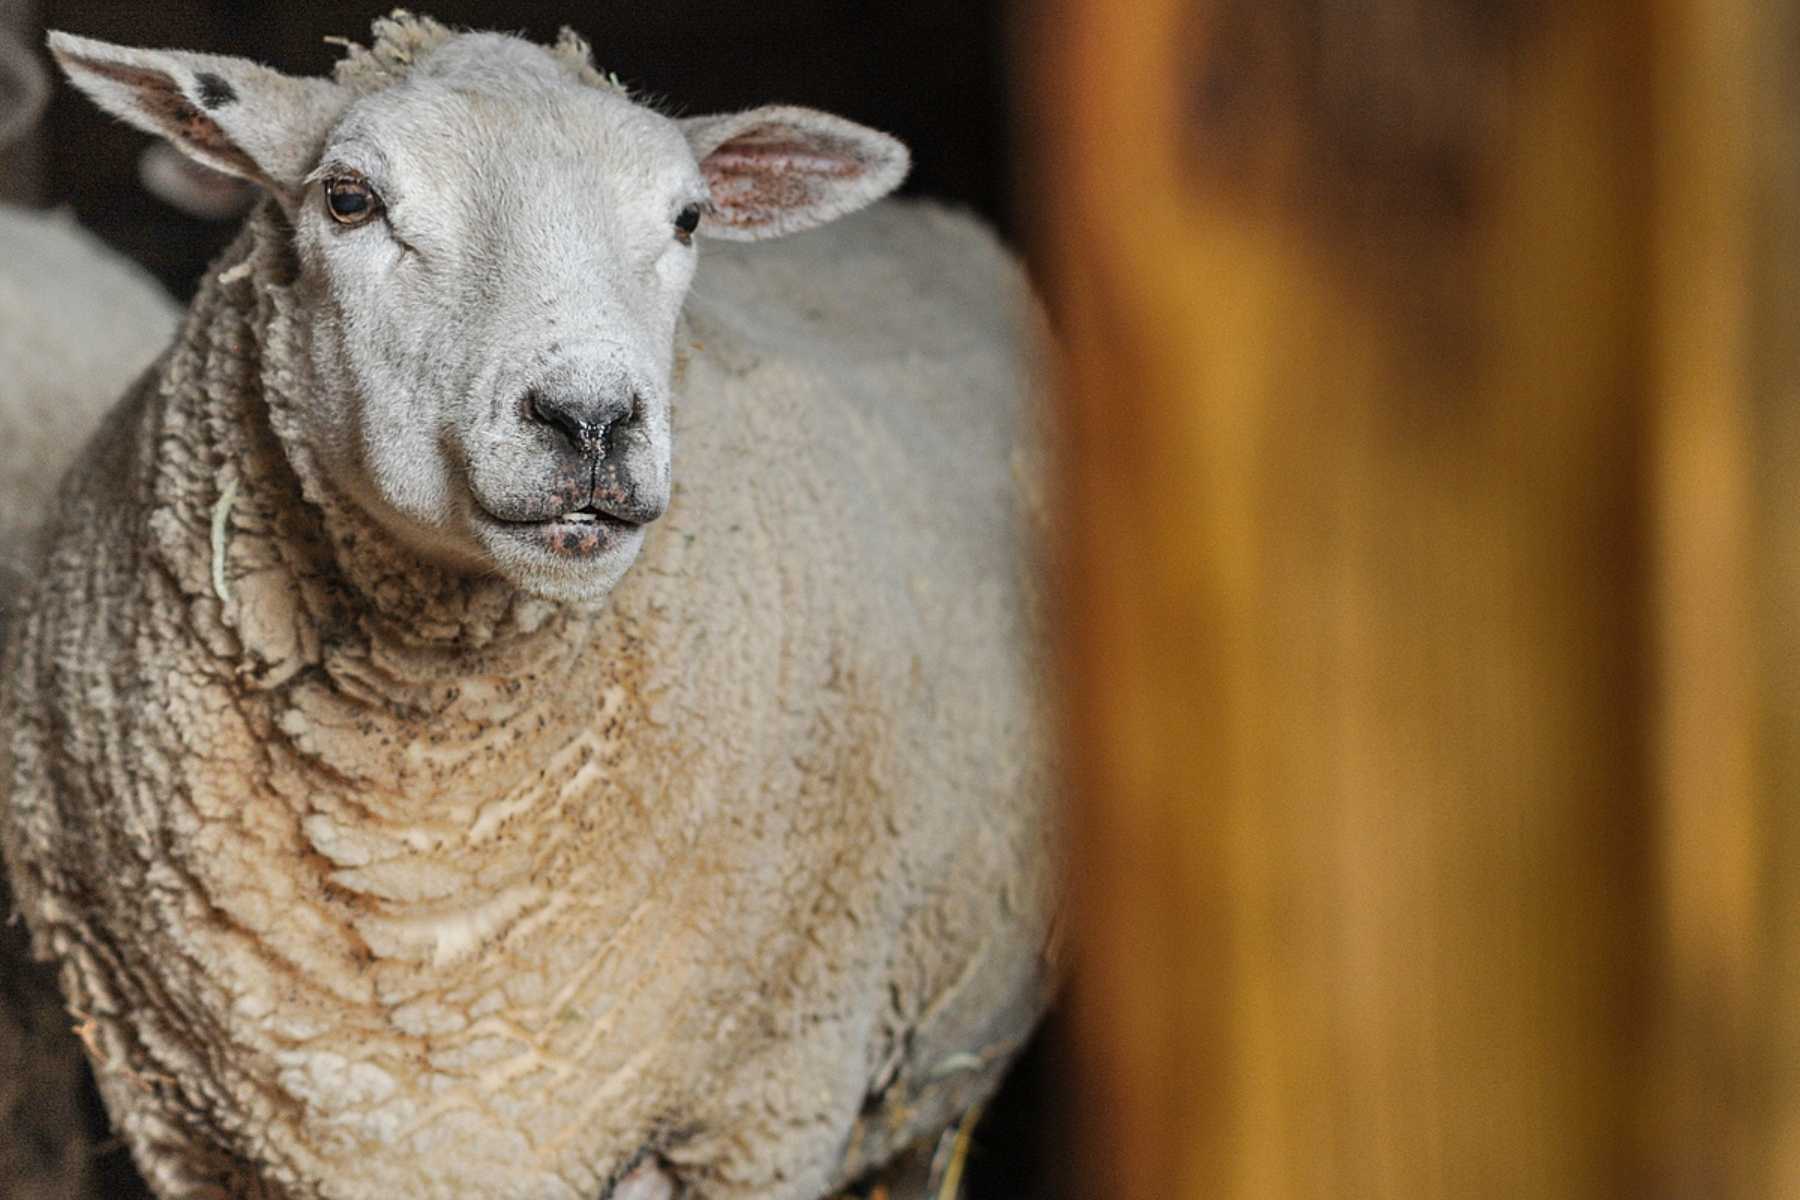 Resident rescued sheep at Farm Sanctuary.